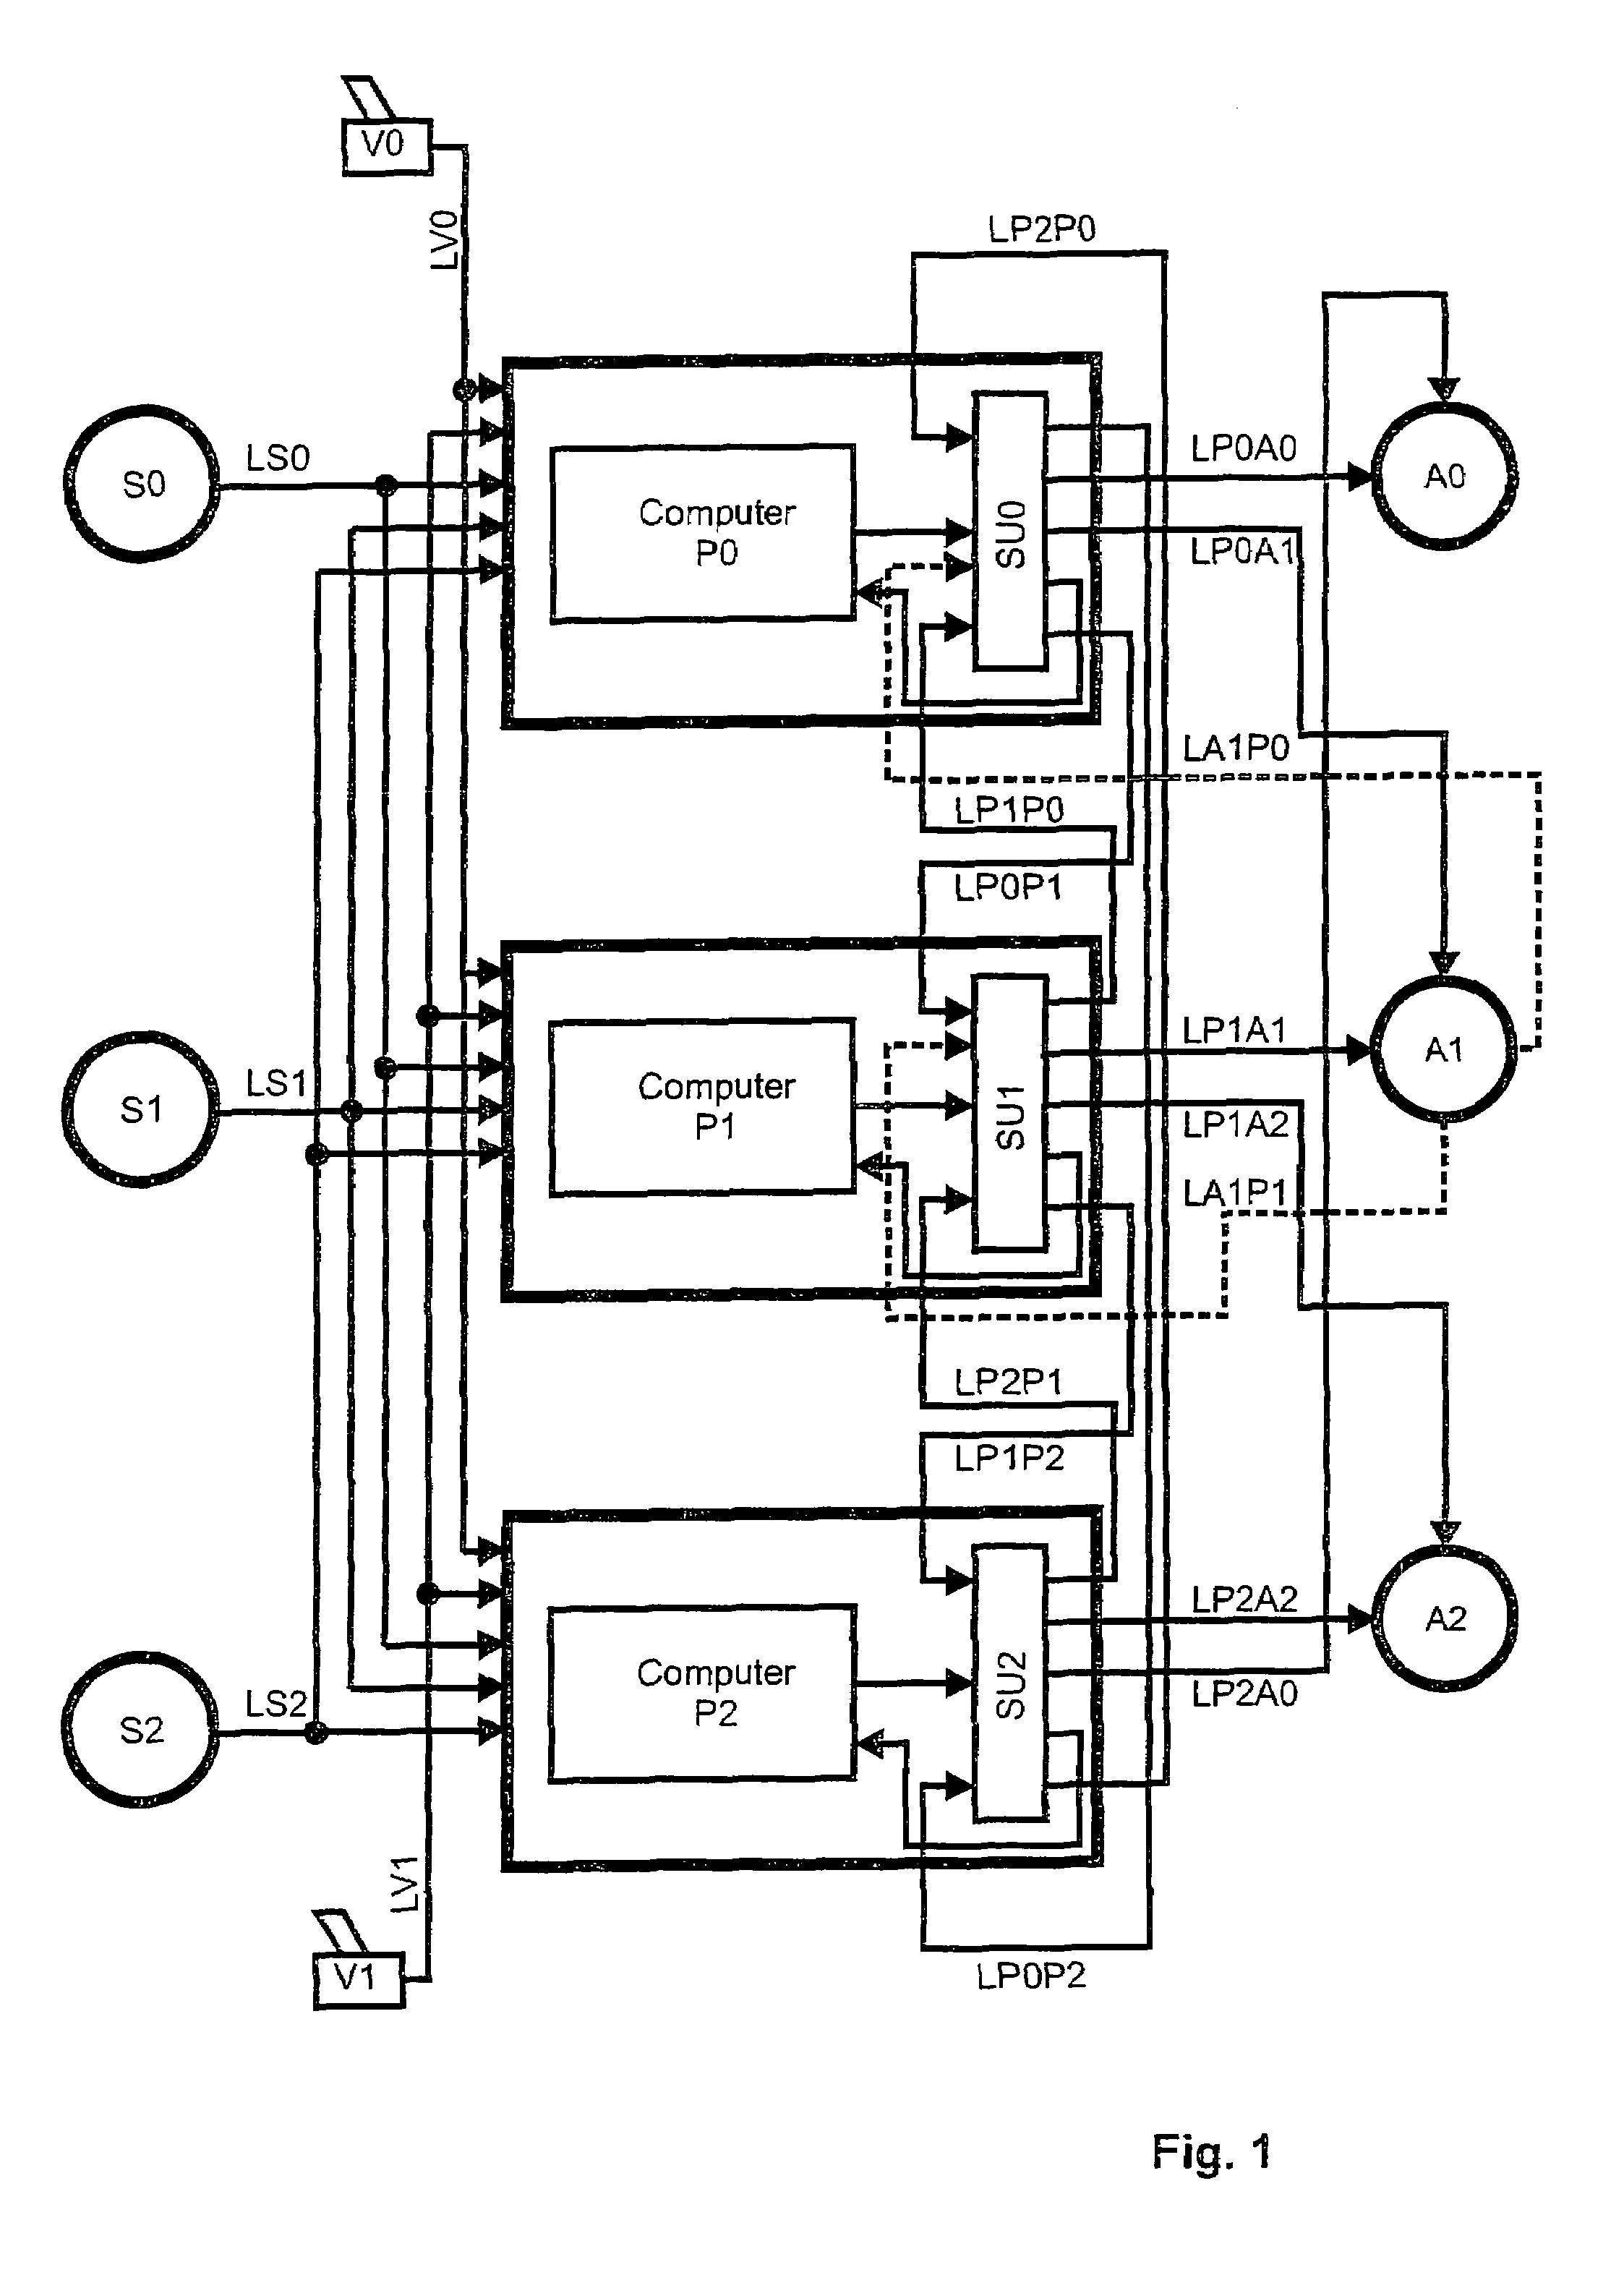 Fault tolerant computer controlled system